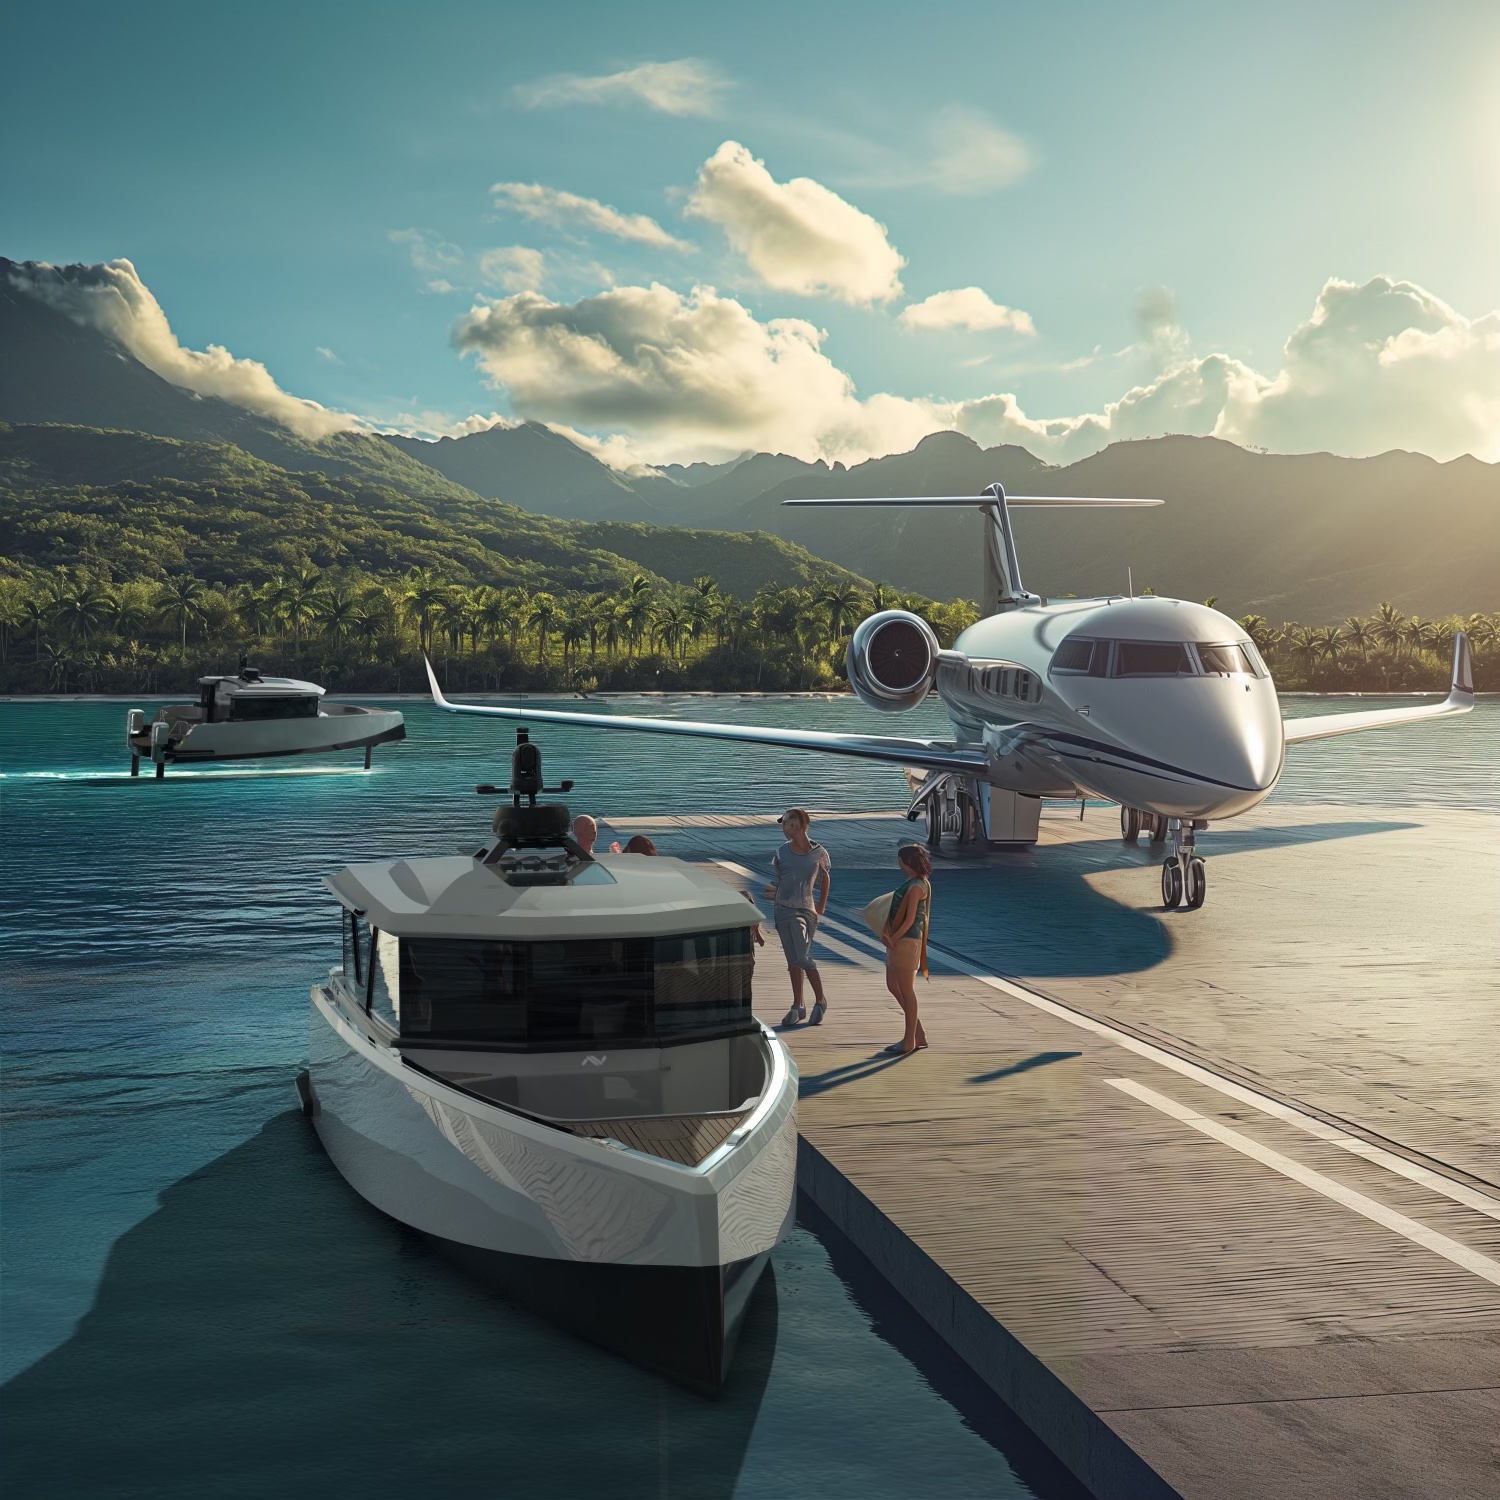 a daytime rendering of a boat at a dock next to a plane, with a mountain landscape in the background